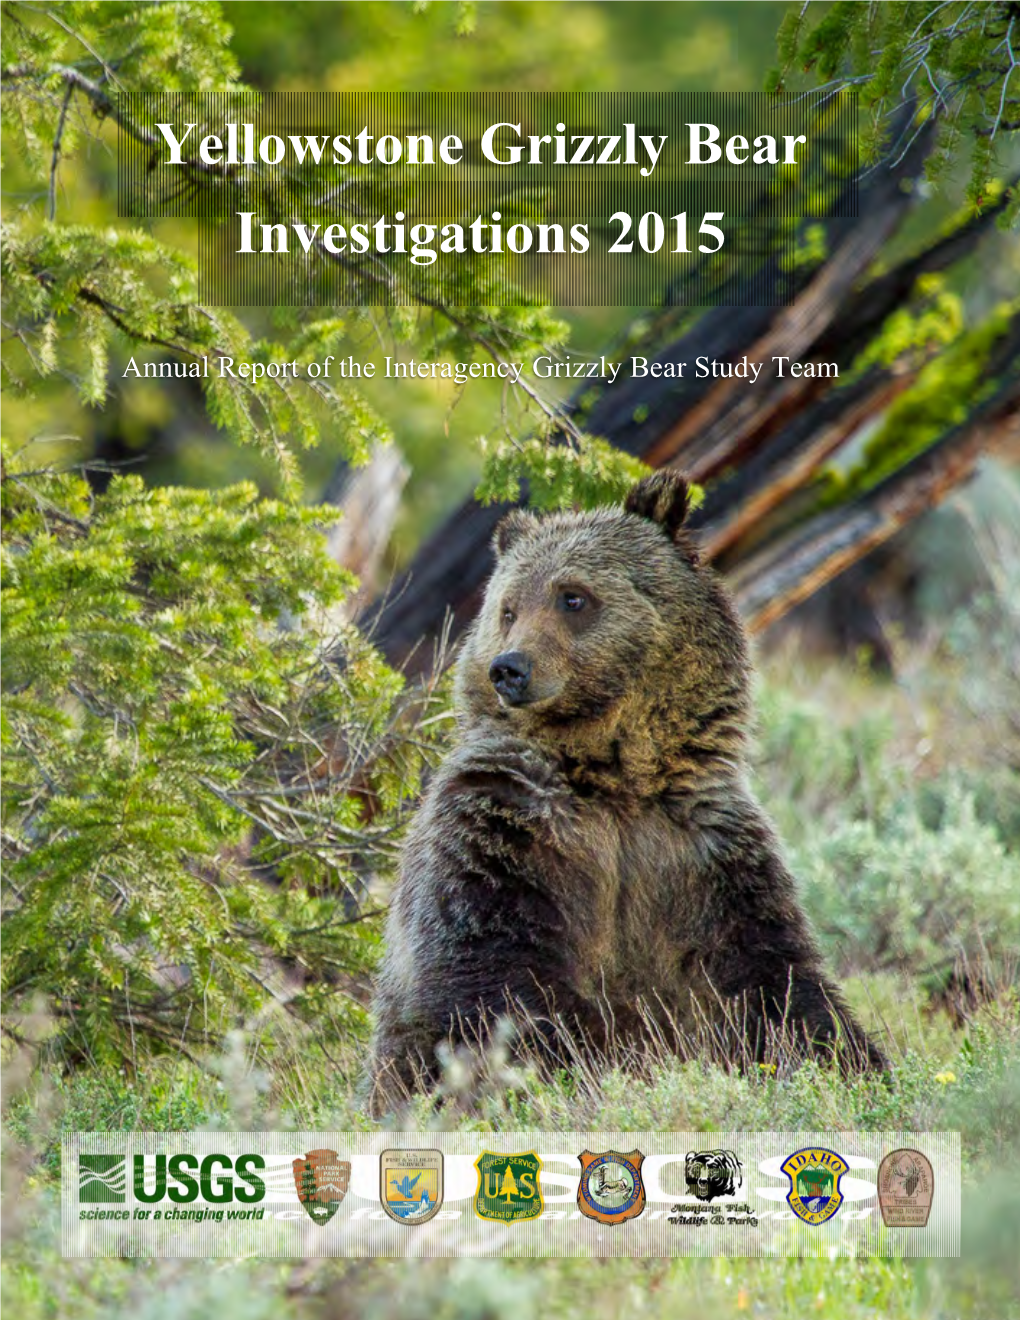 Yellowstone Grizzly Bear Investigations 2015